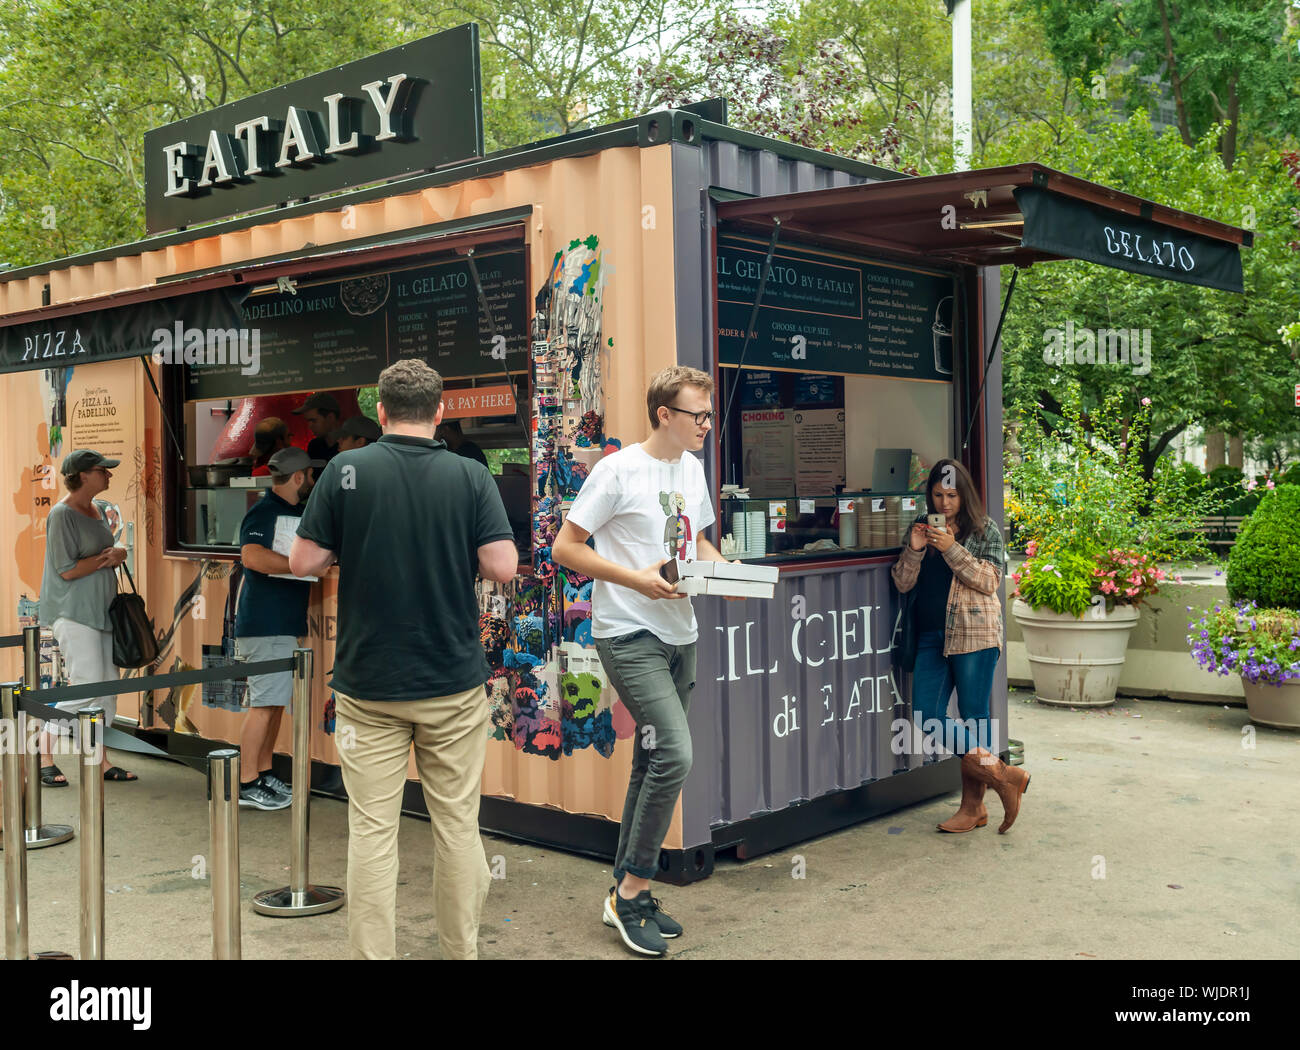 The new Eataly kiosk in Flatiron Plaza, across from the Eataly Italian emporium, on opening day in New York on Friday, August 23, 2019. The new kiosk, named appropriately, “Eataly in Flatiron Plaza”, serves Pizza al Padellino and gelato. Pizza al Padellino is a specialty of the Piedmont region of Italy. (© Richard B. Levine) Stock Photo